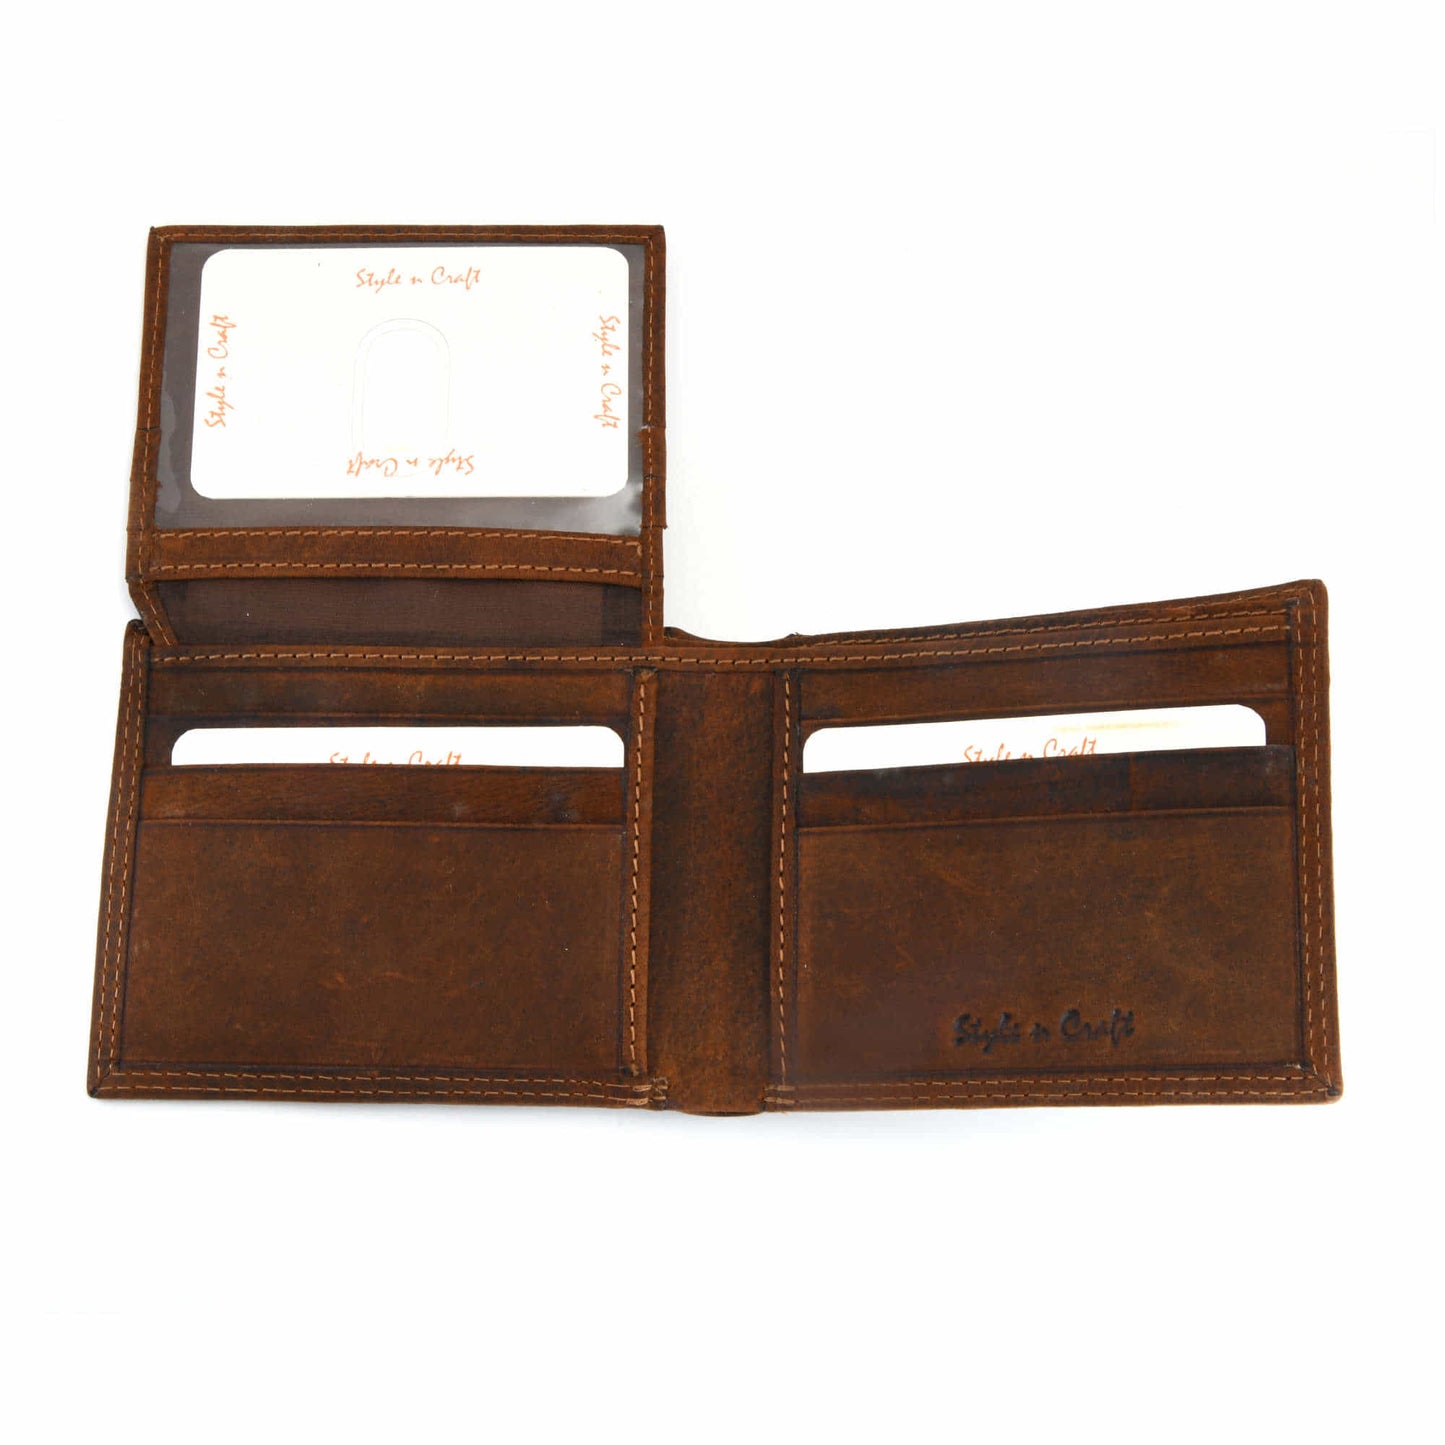 Style n Craft 300796-BR Bi-Fold PassCase Wallet with Flap in Full Grain Vintage Look Leather - brown color - inside open flap view showing credit card pockets